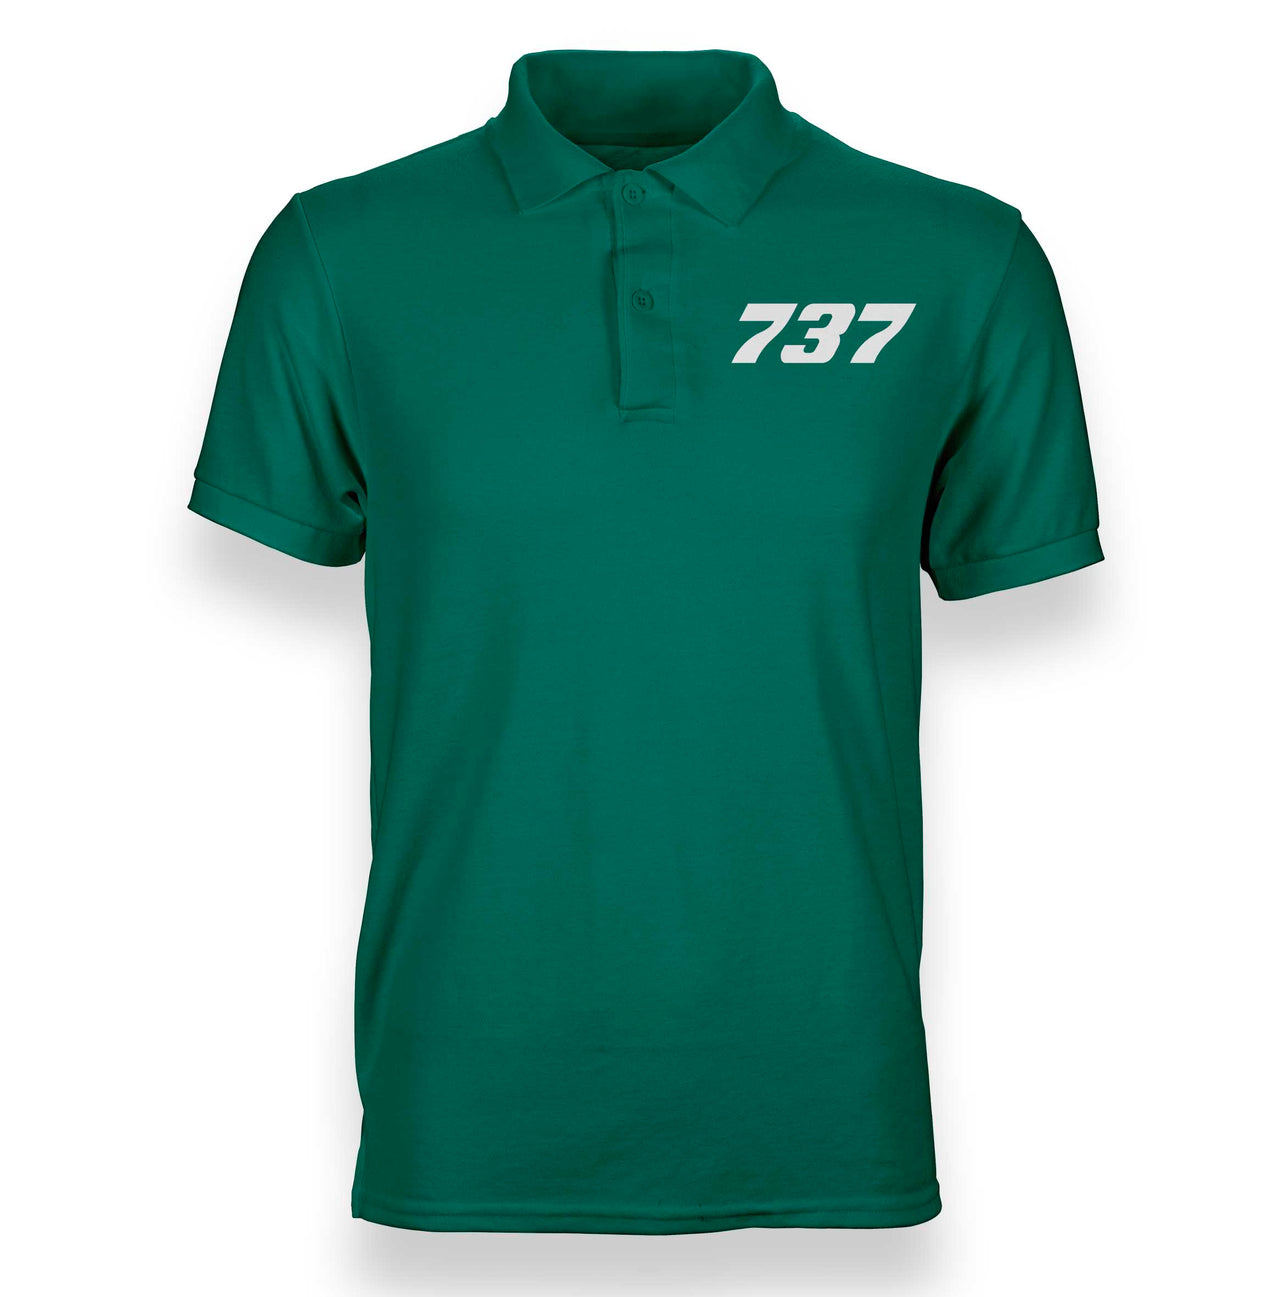 Boeing 737 Flat Text Designed Polo T-Shirts